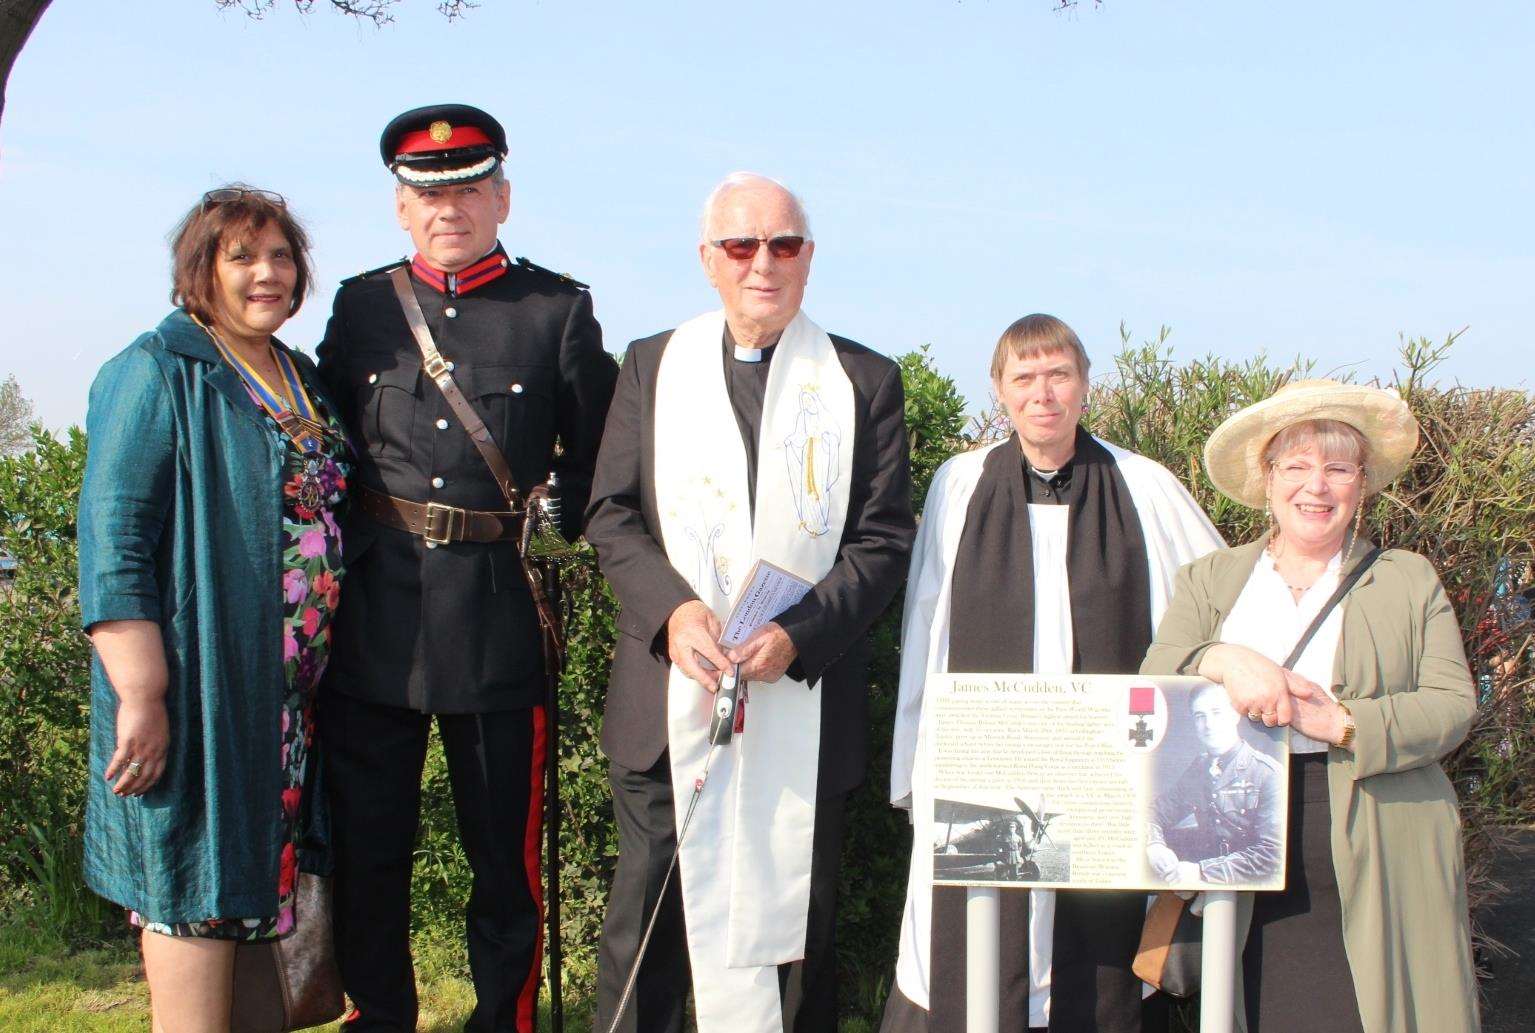 Deputy Lord Lieutenant of Kent Paul Auston with, from the left, Jenny Hurkett, Father Frank Moran, the Rev Jeanette Mclaren and Janys Thornton at the unveiling of the Capt James McCudden VC paving stone at Sheerness War Memorial